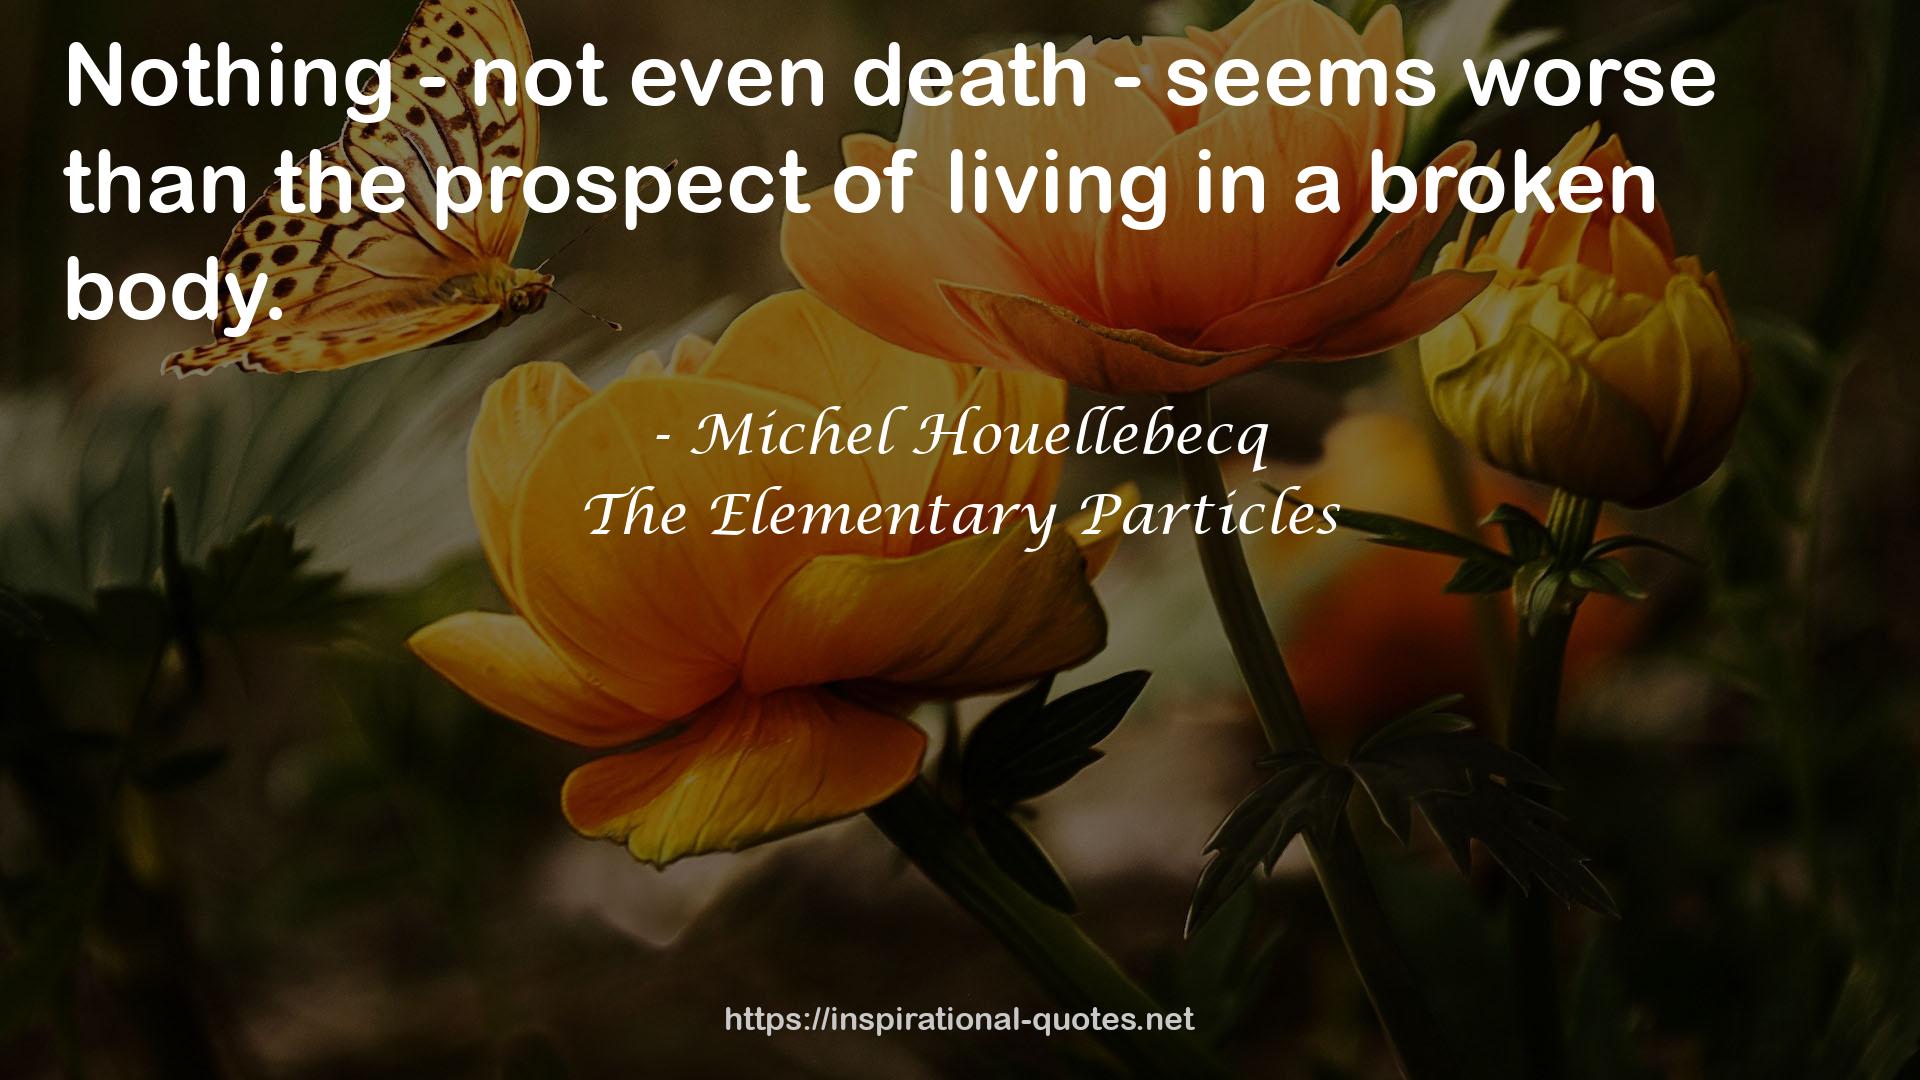 The Elementary Particles QUOTES